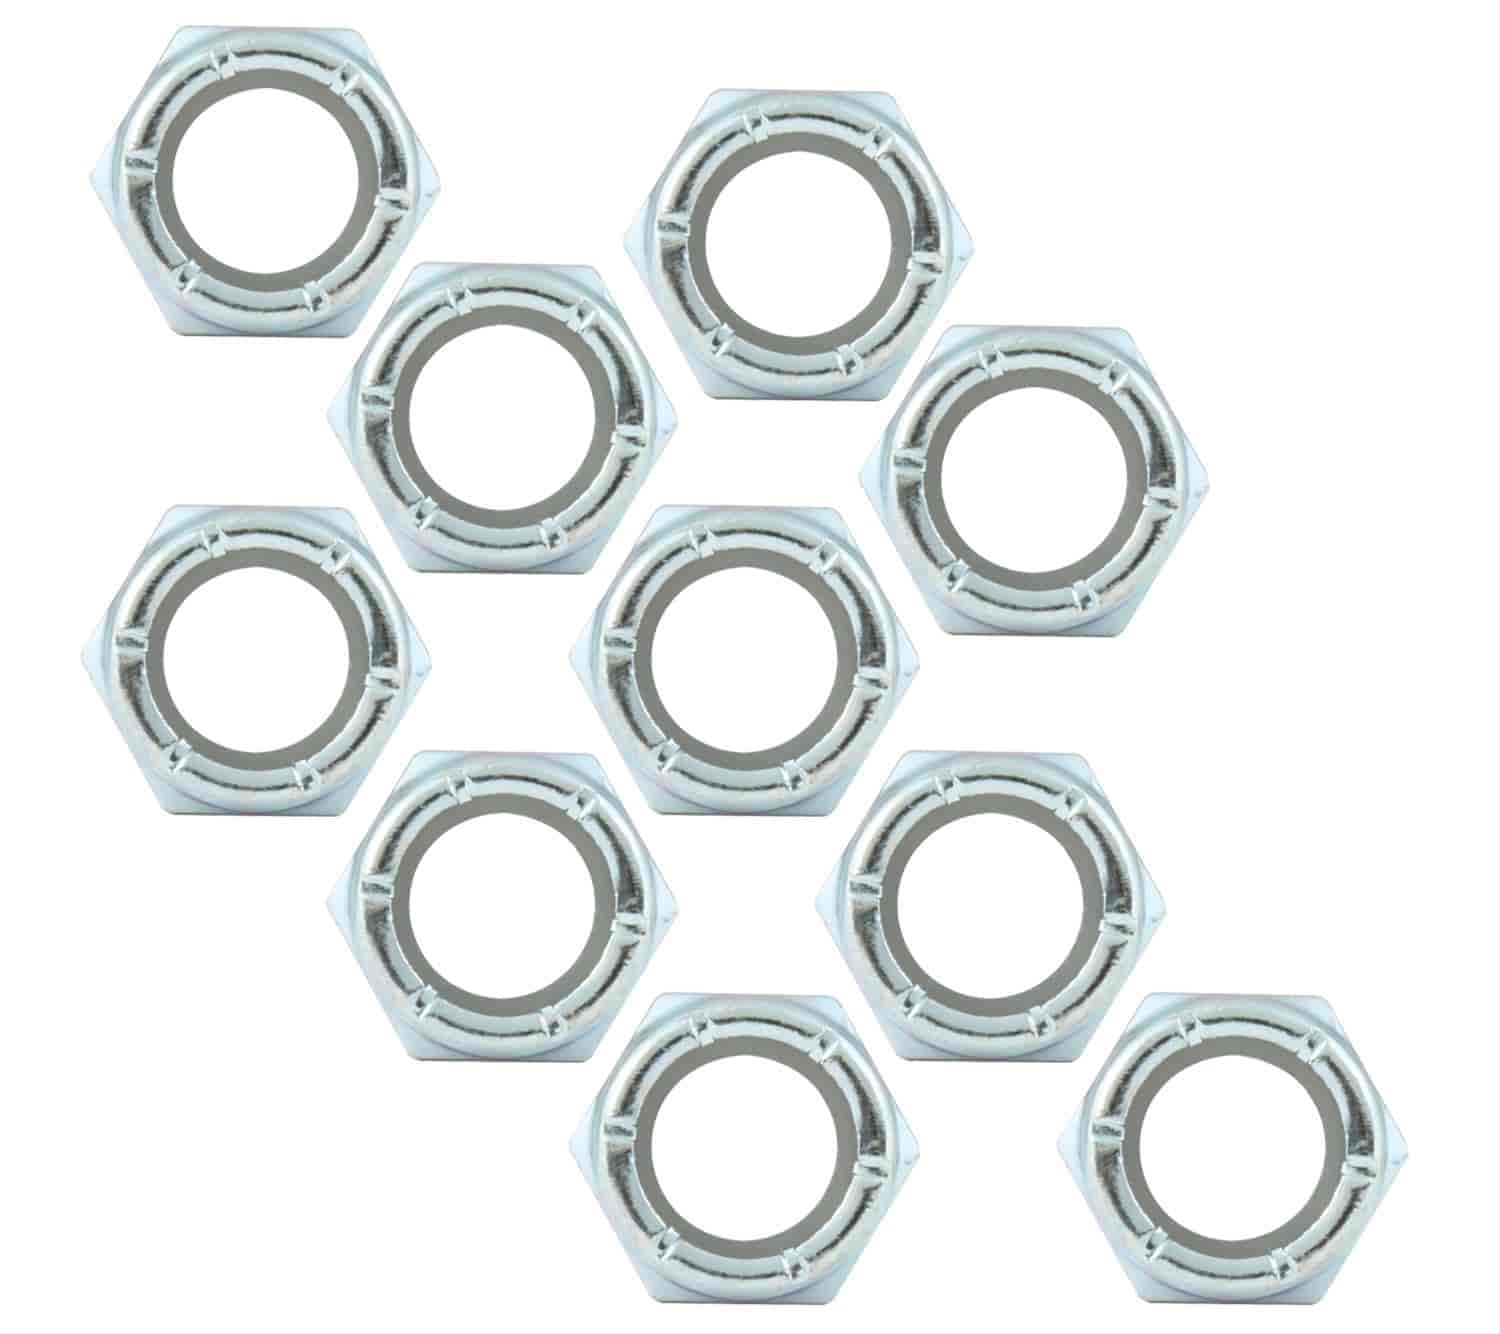 Fine Thread Hex Nuts With Nylon Inserts 1/2